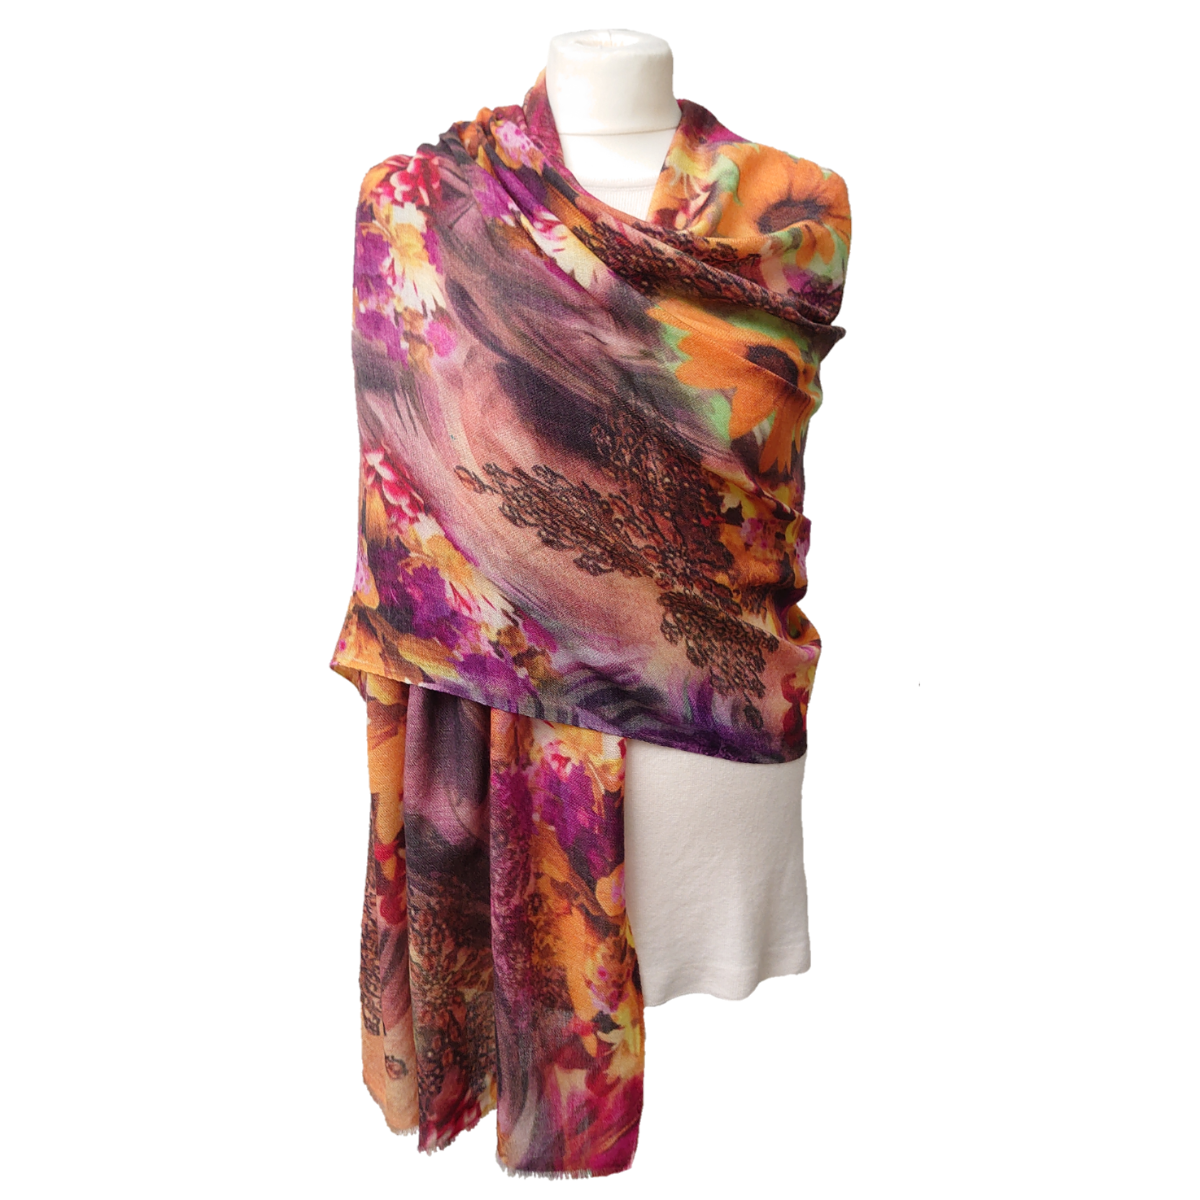 Ltd Edition 100% Pure Pashmina Cashmere Stole - Large Scarf - Yellow And Pink Flowers